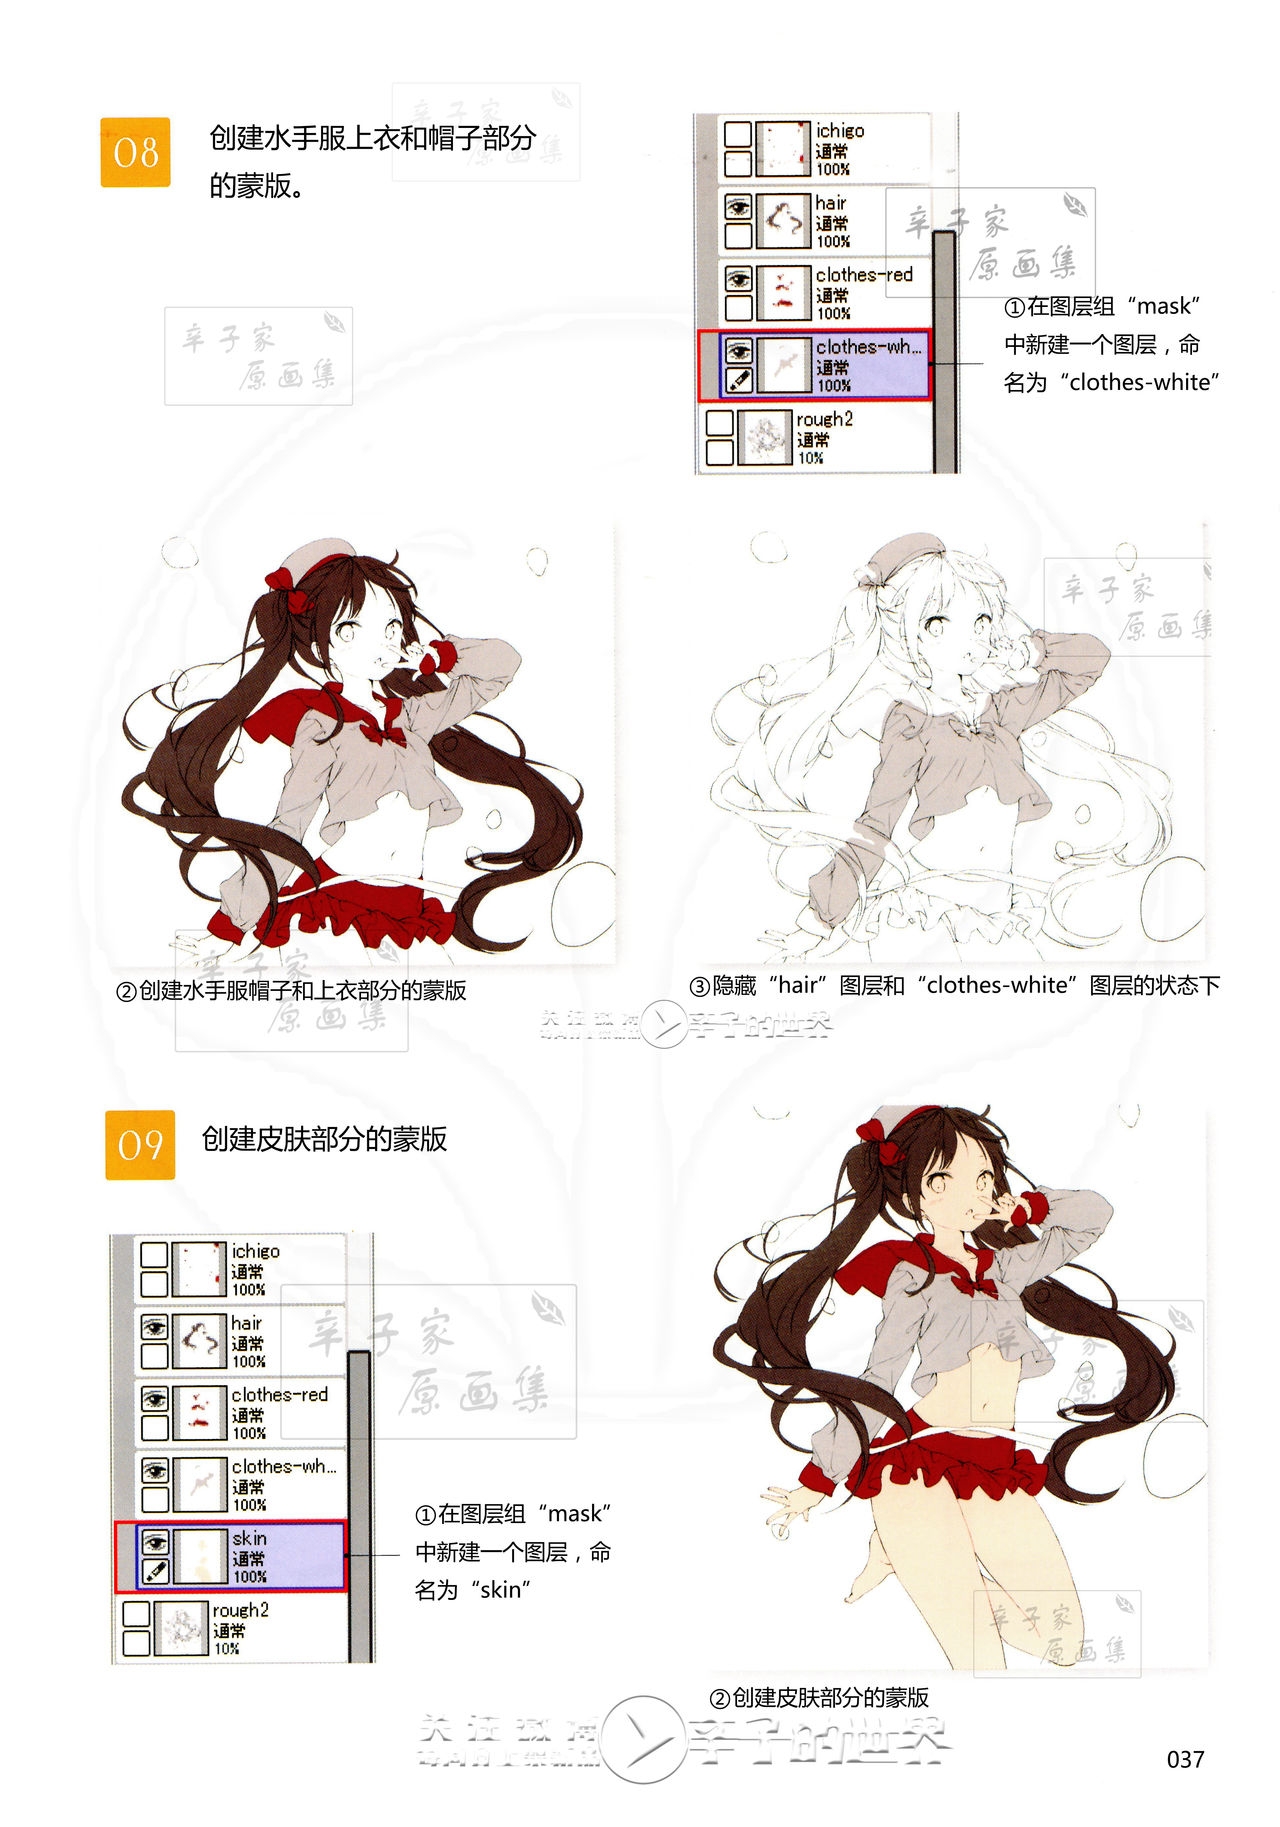 [Anmi] Lets Make ★ Character CG illustration techniques vol.9 [Chinese] 35